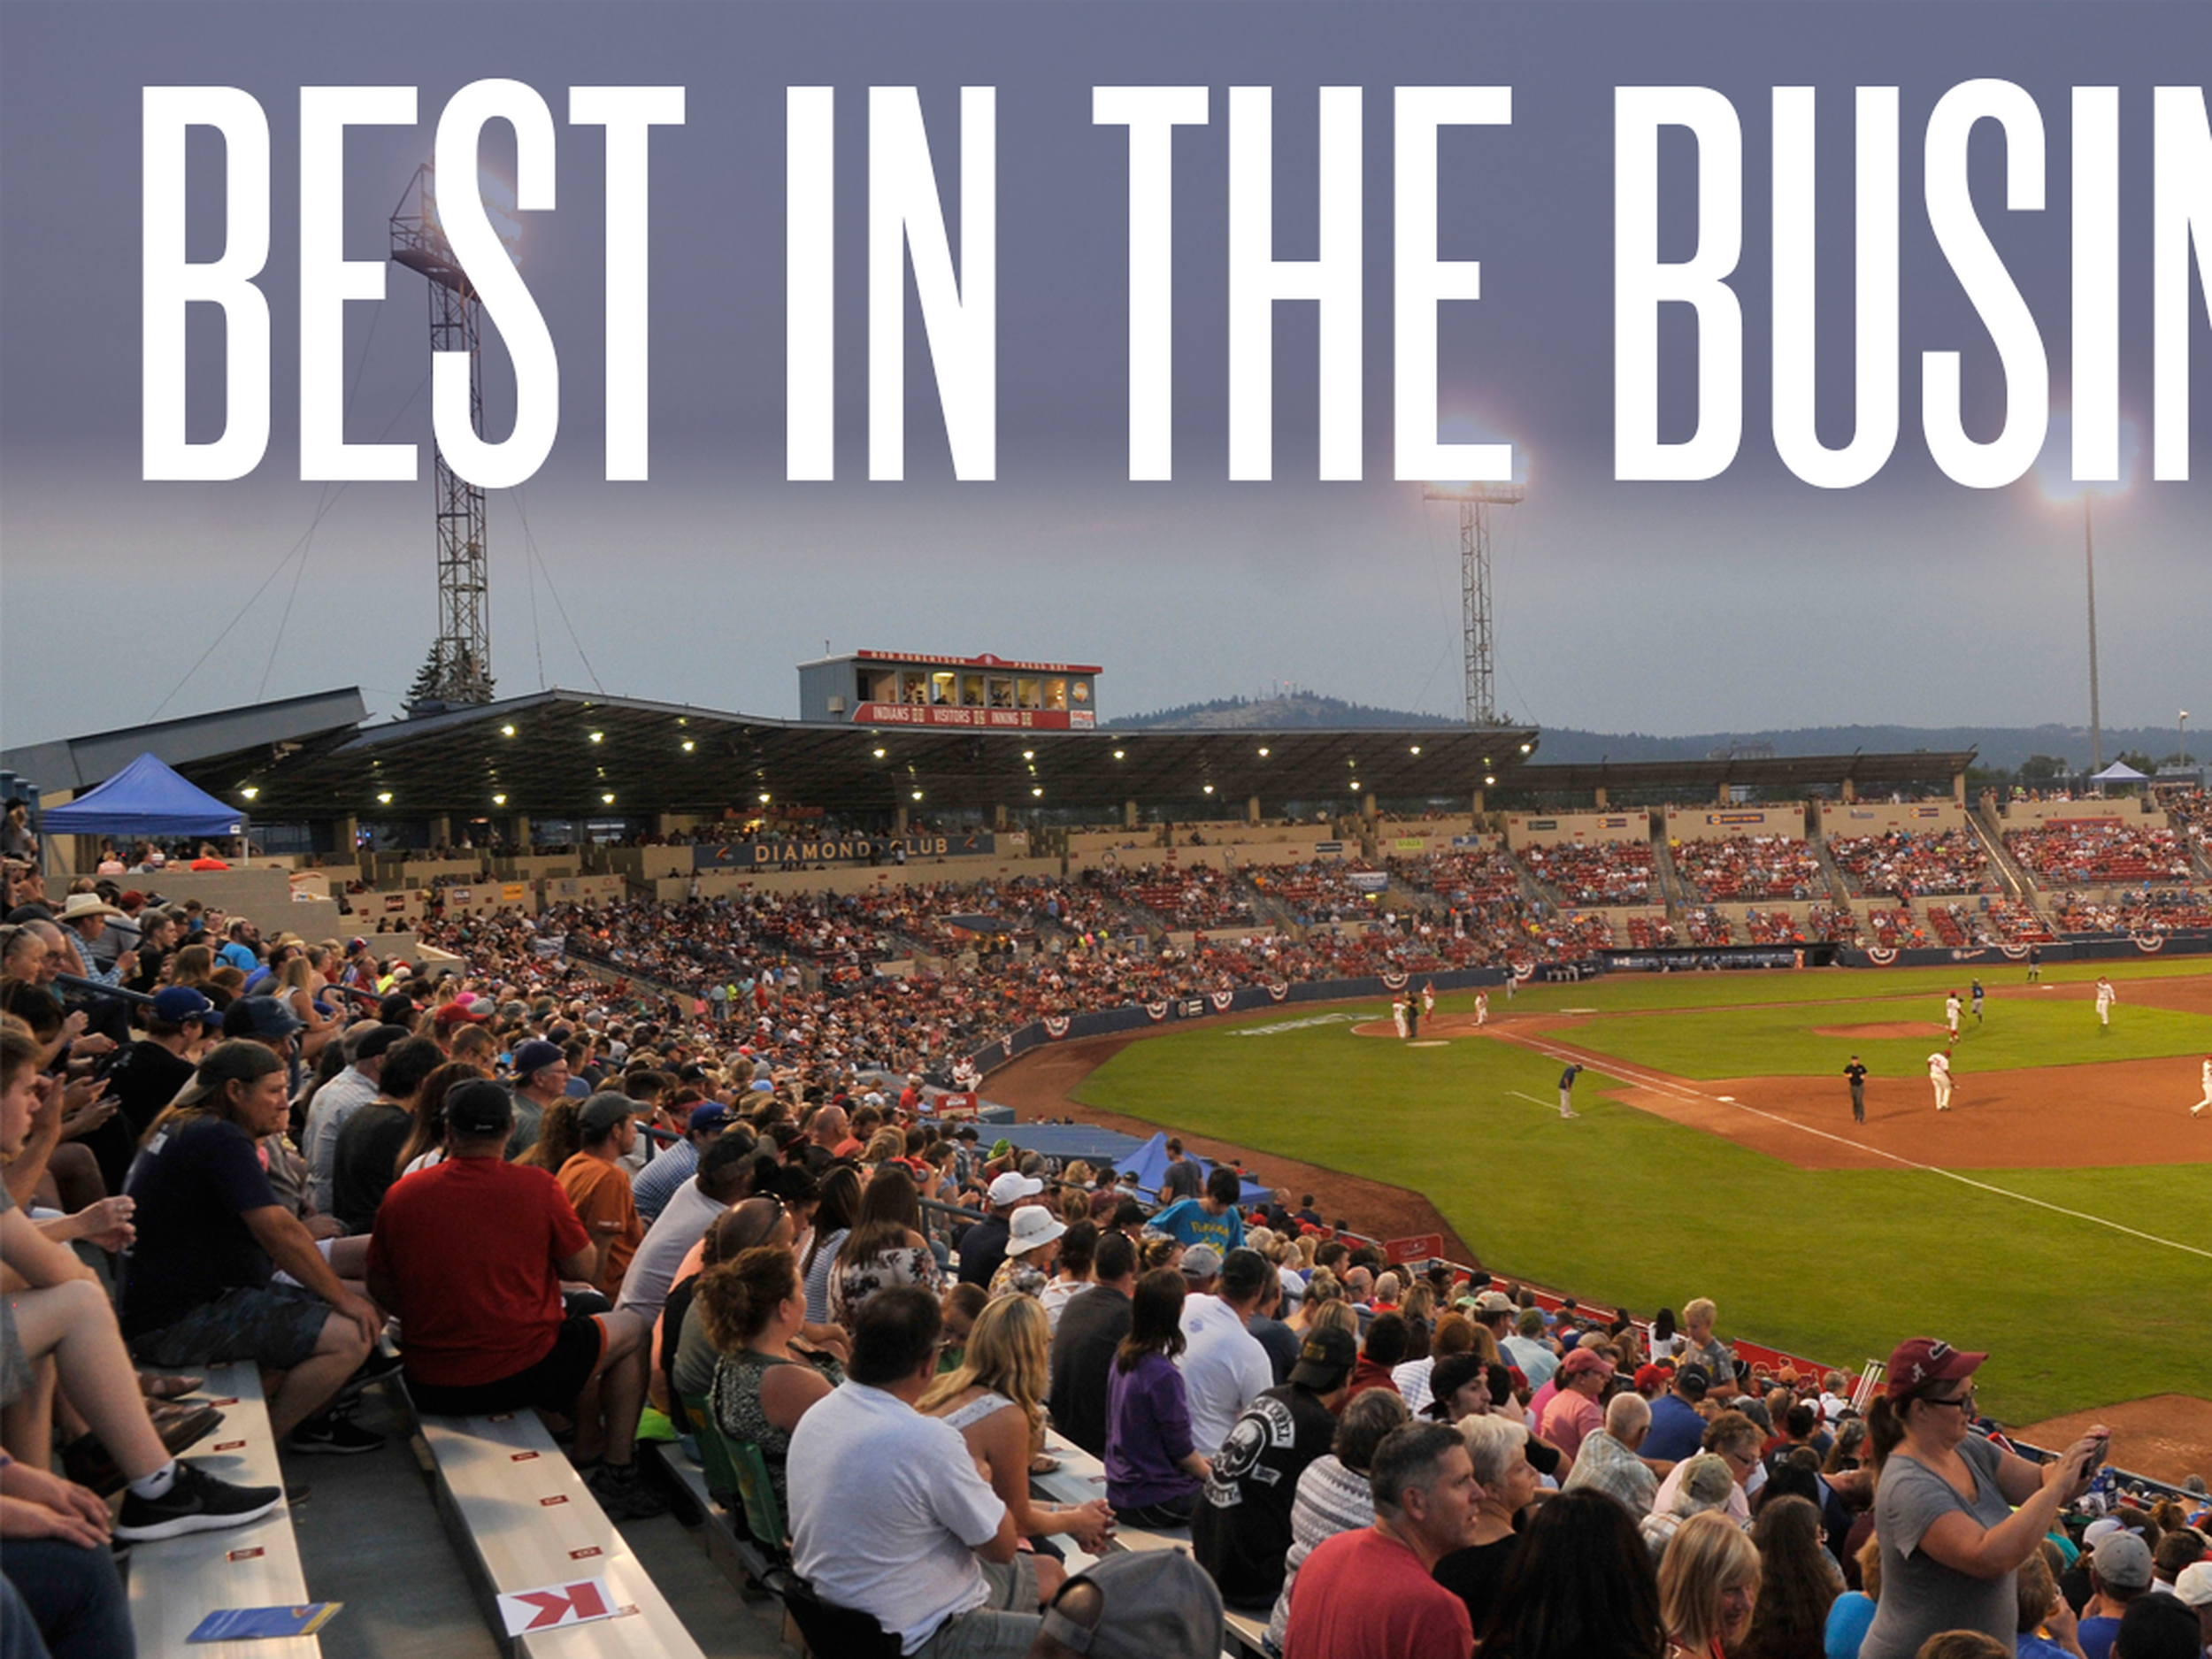 Spokane Indians - Avista Stadium has advanced to the Best of the Ballparks  finals. Keep voting every day (and on every device) and let's bring the  title home to #Spokane! Vote now